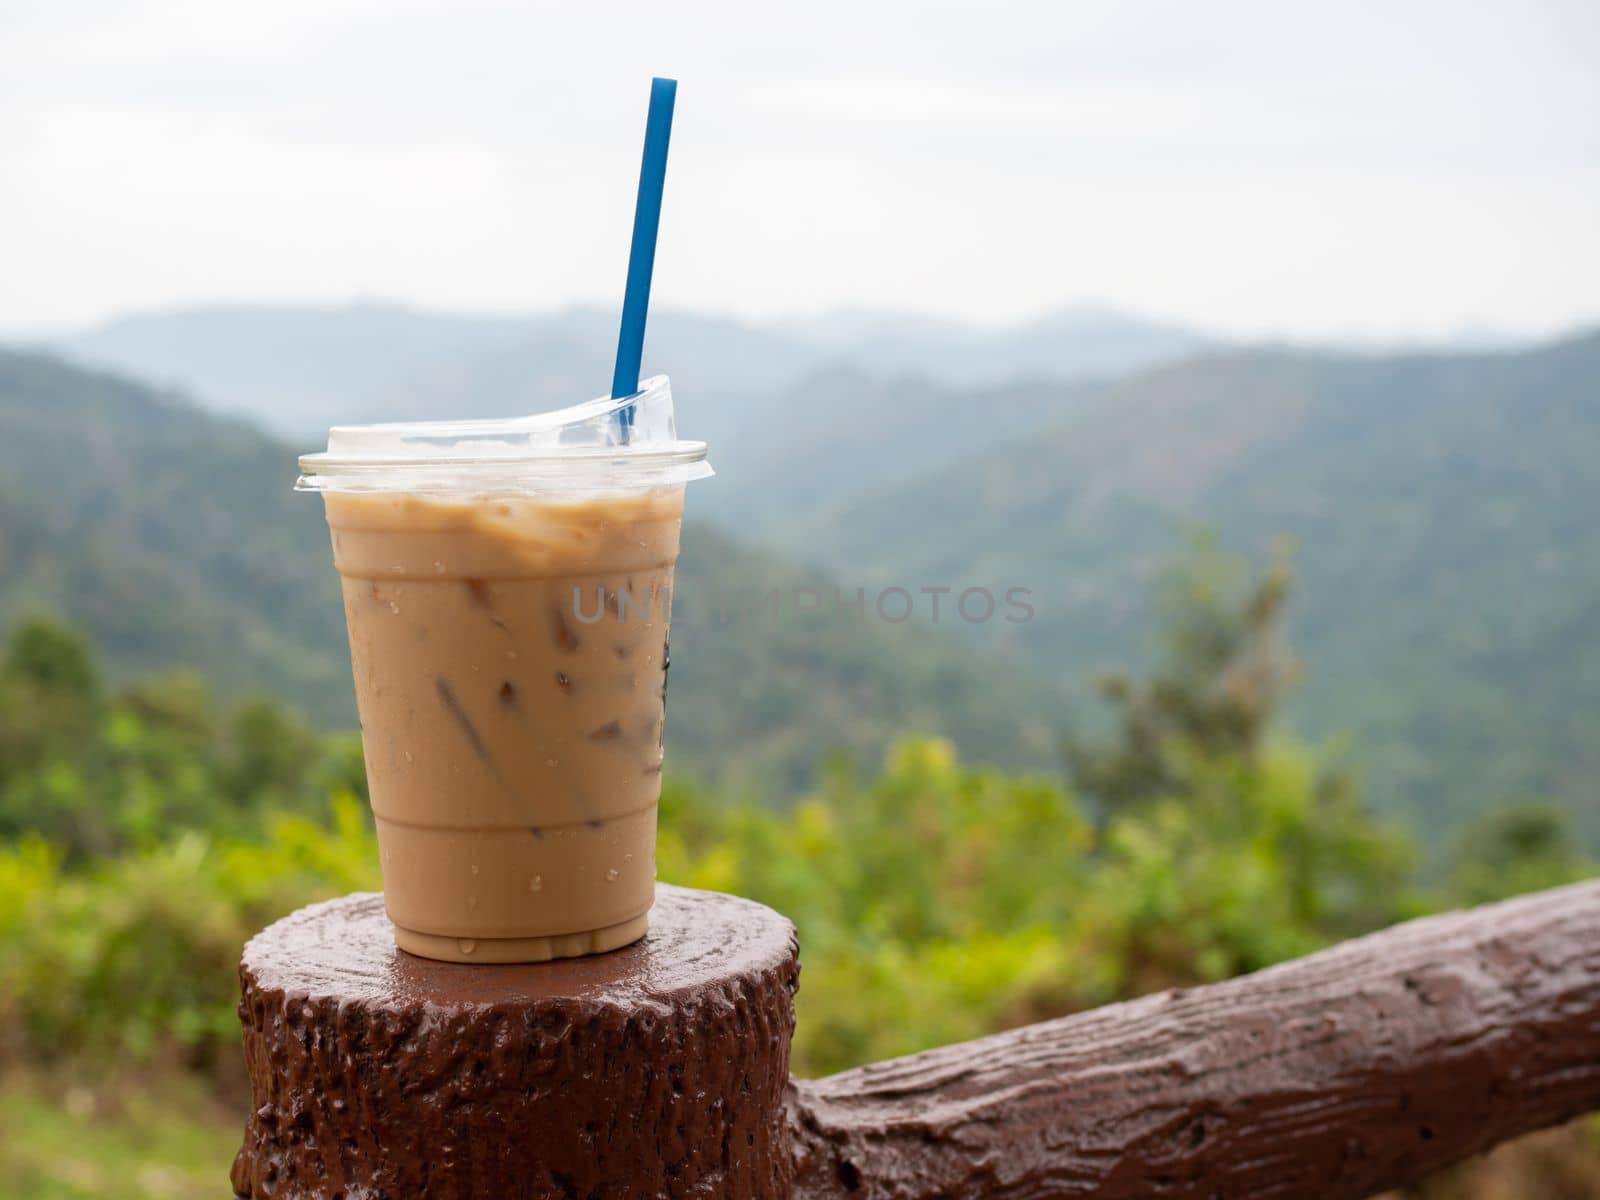 A glass of iced coffee is placed on the fence against a backdrop of mountains and sky. by Unimages2527